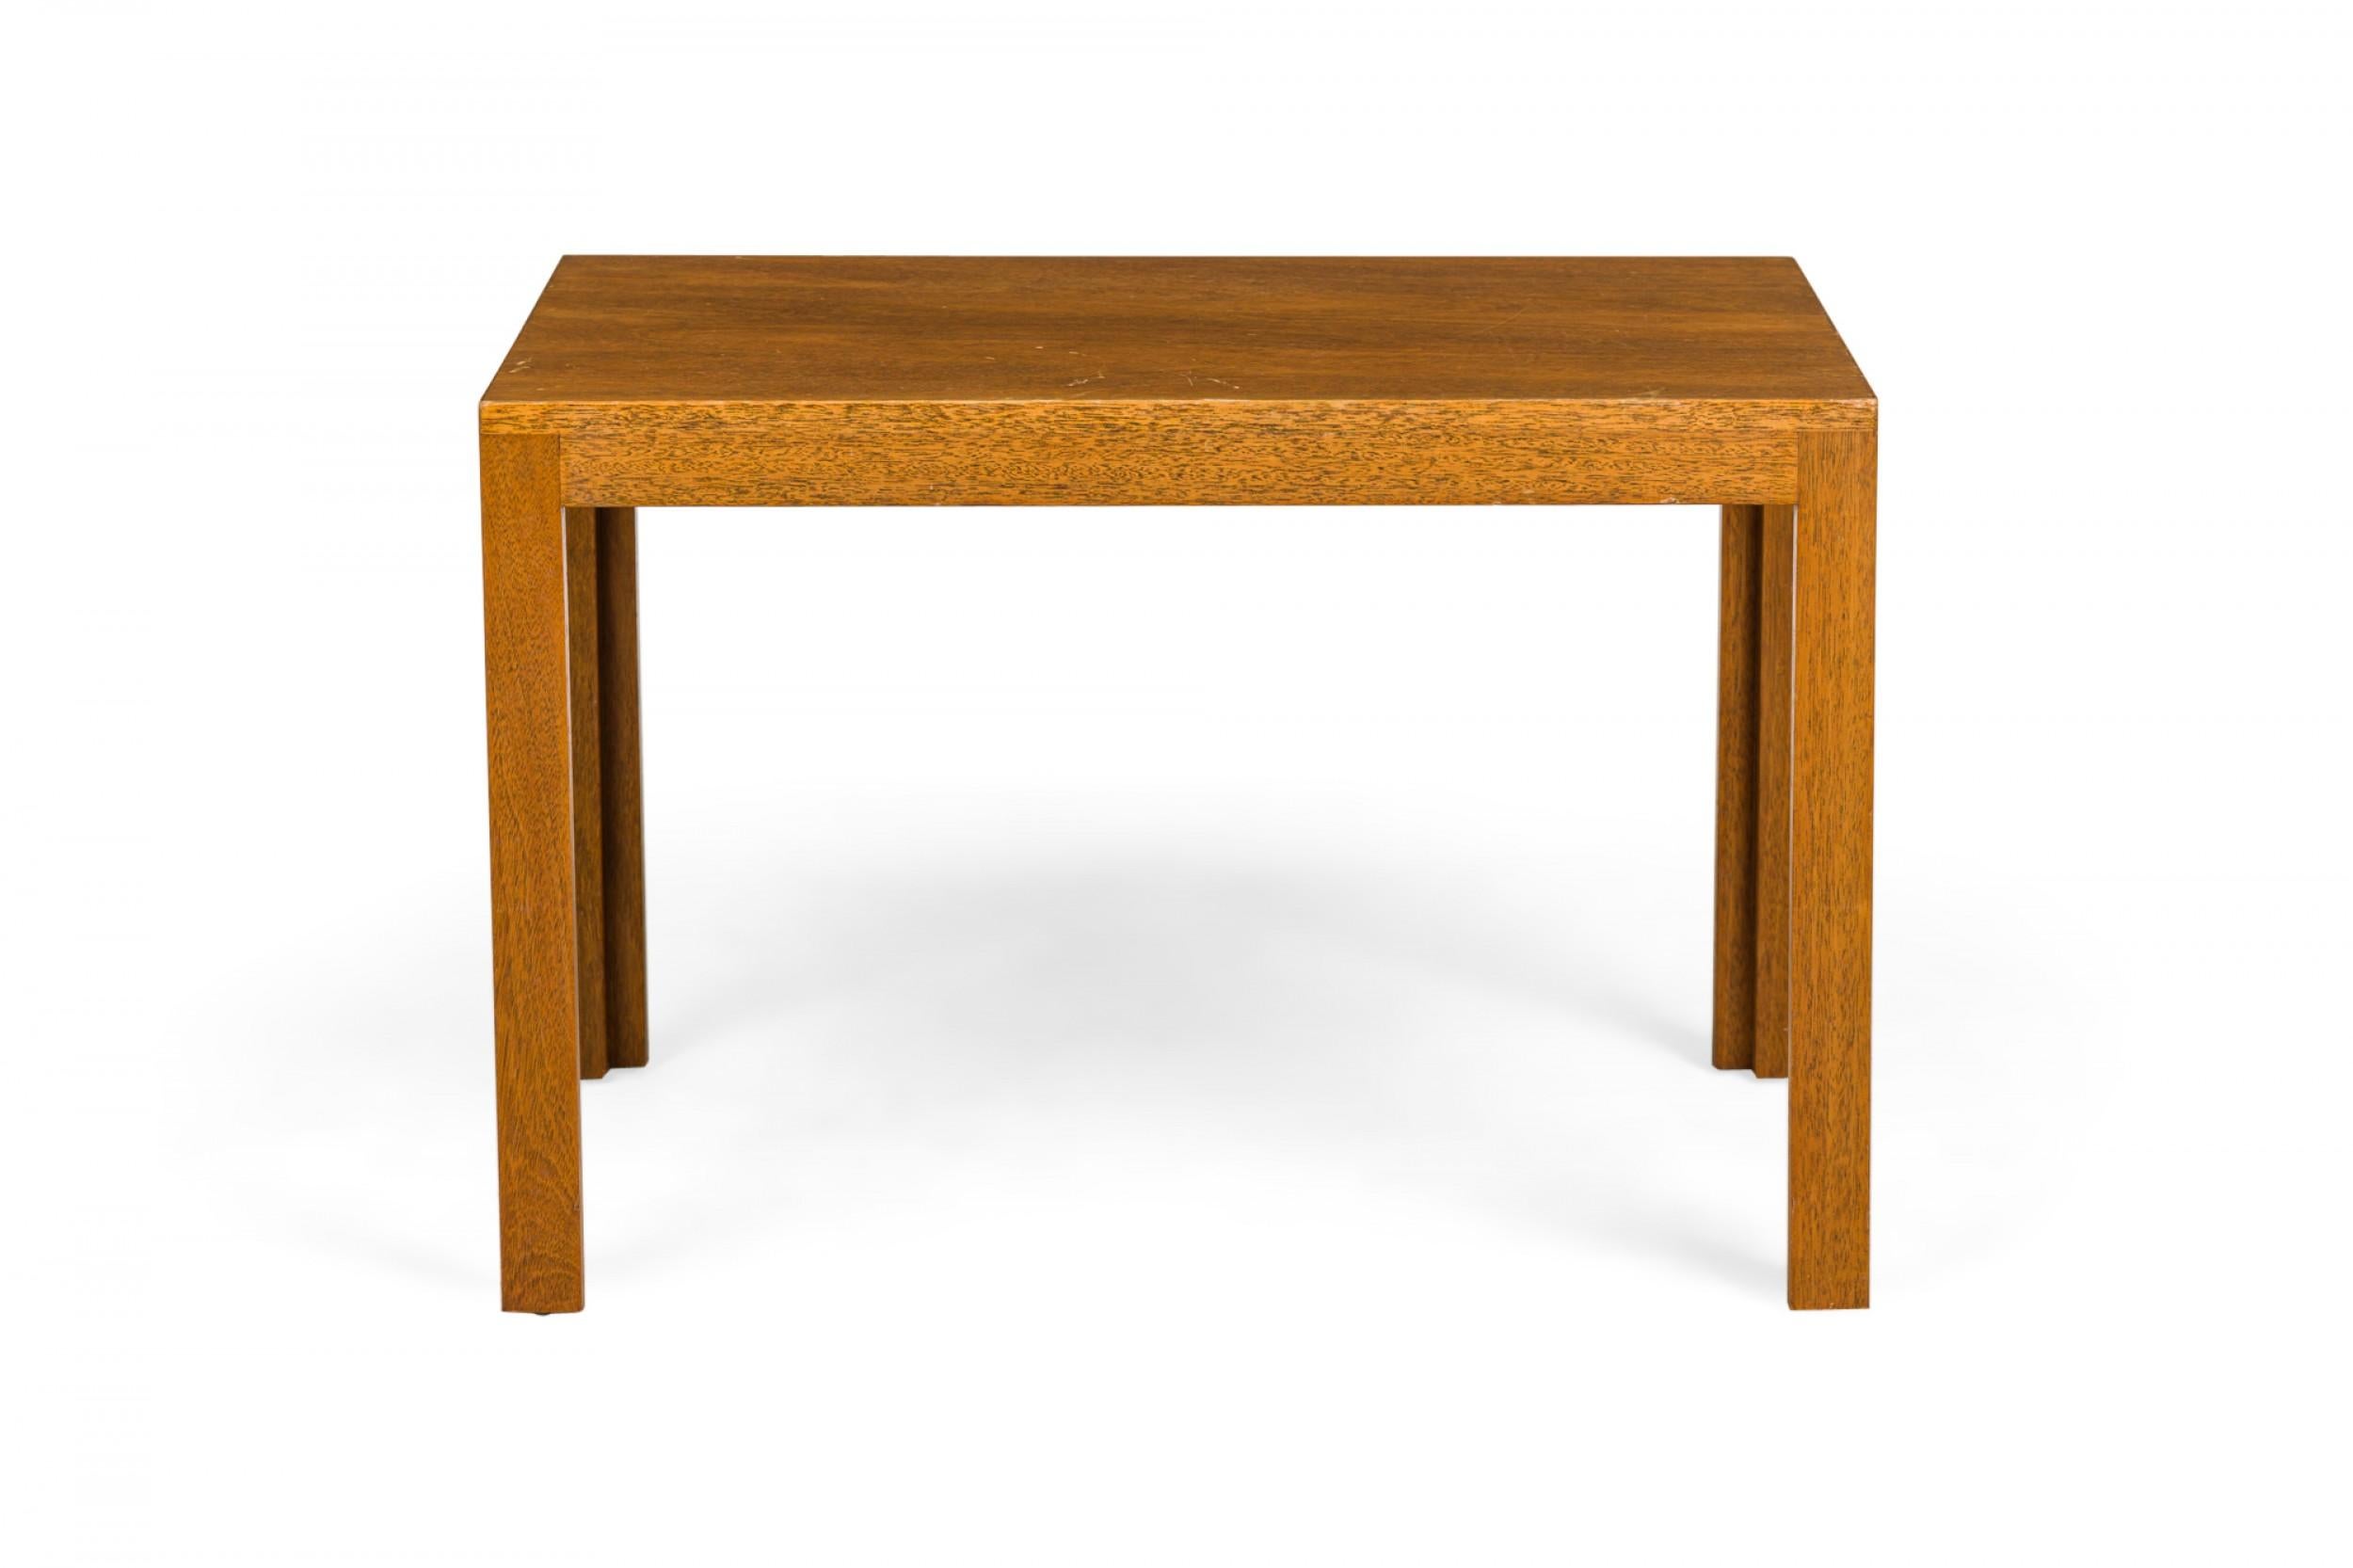 American Mid-Century Parsons-style end table with a wooden rectangular form. (EDWARD WORMLEY FOR DUNBAR FURNITURE COMPANY)
